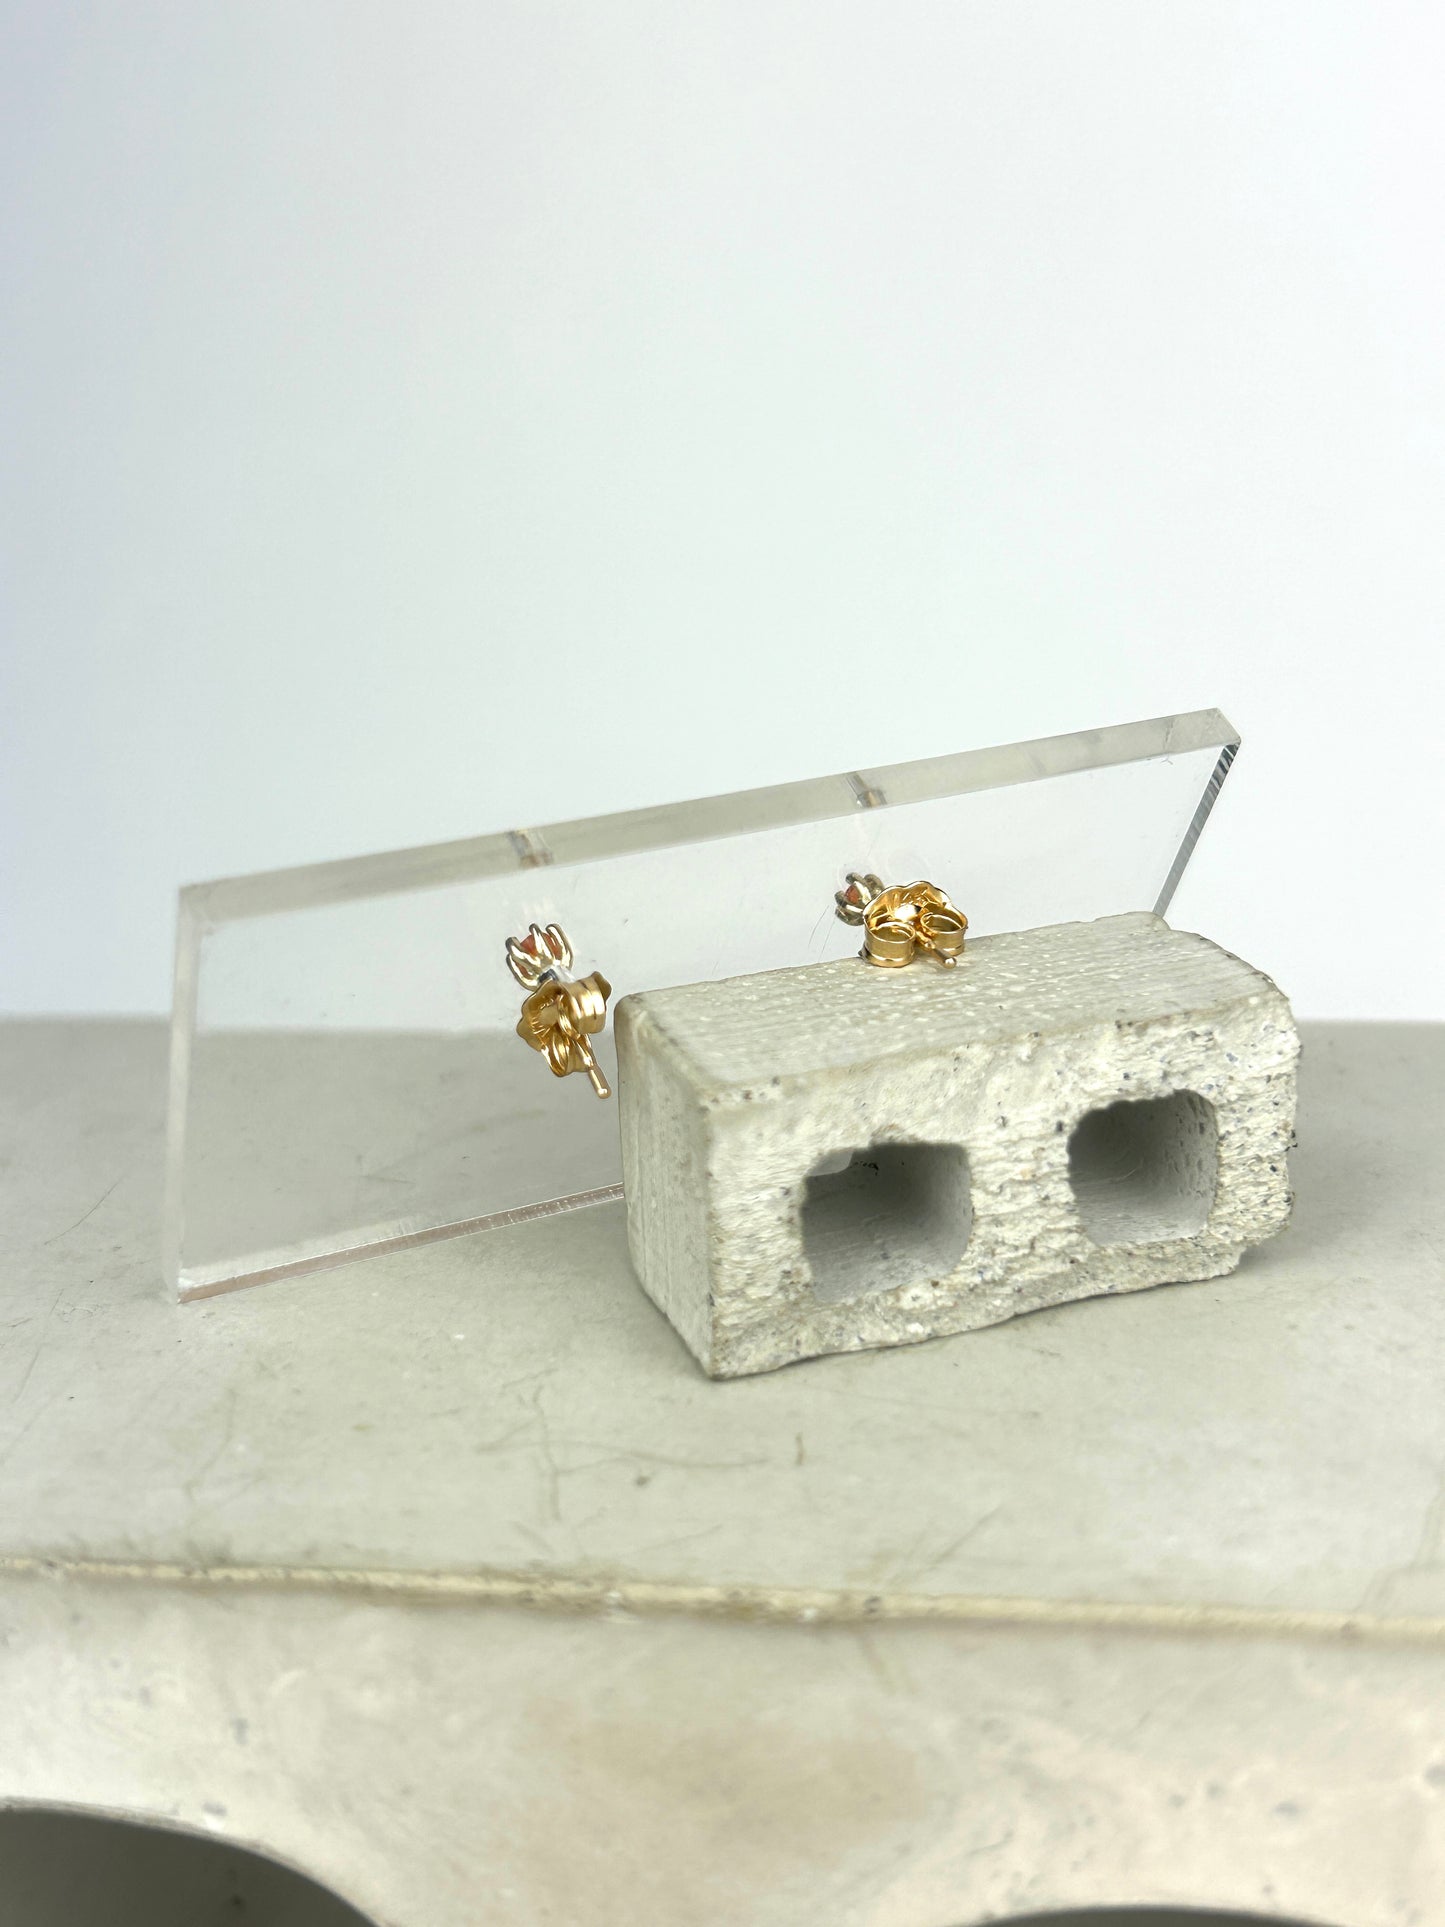 Back view 14k gold earrings with bright orange carnelians, showing the earring backs and are displayed on a clear acrylic card held up by a miniature cinderblock infront of a white background.